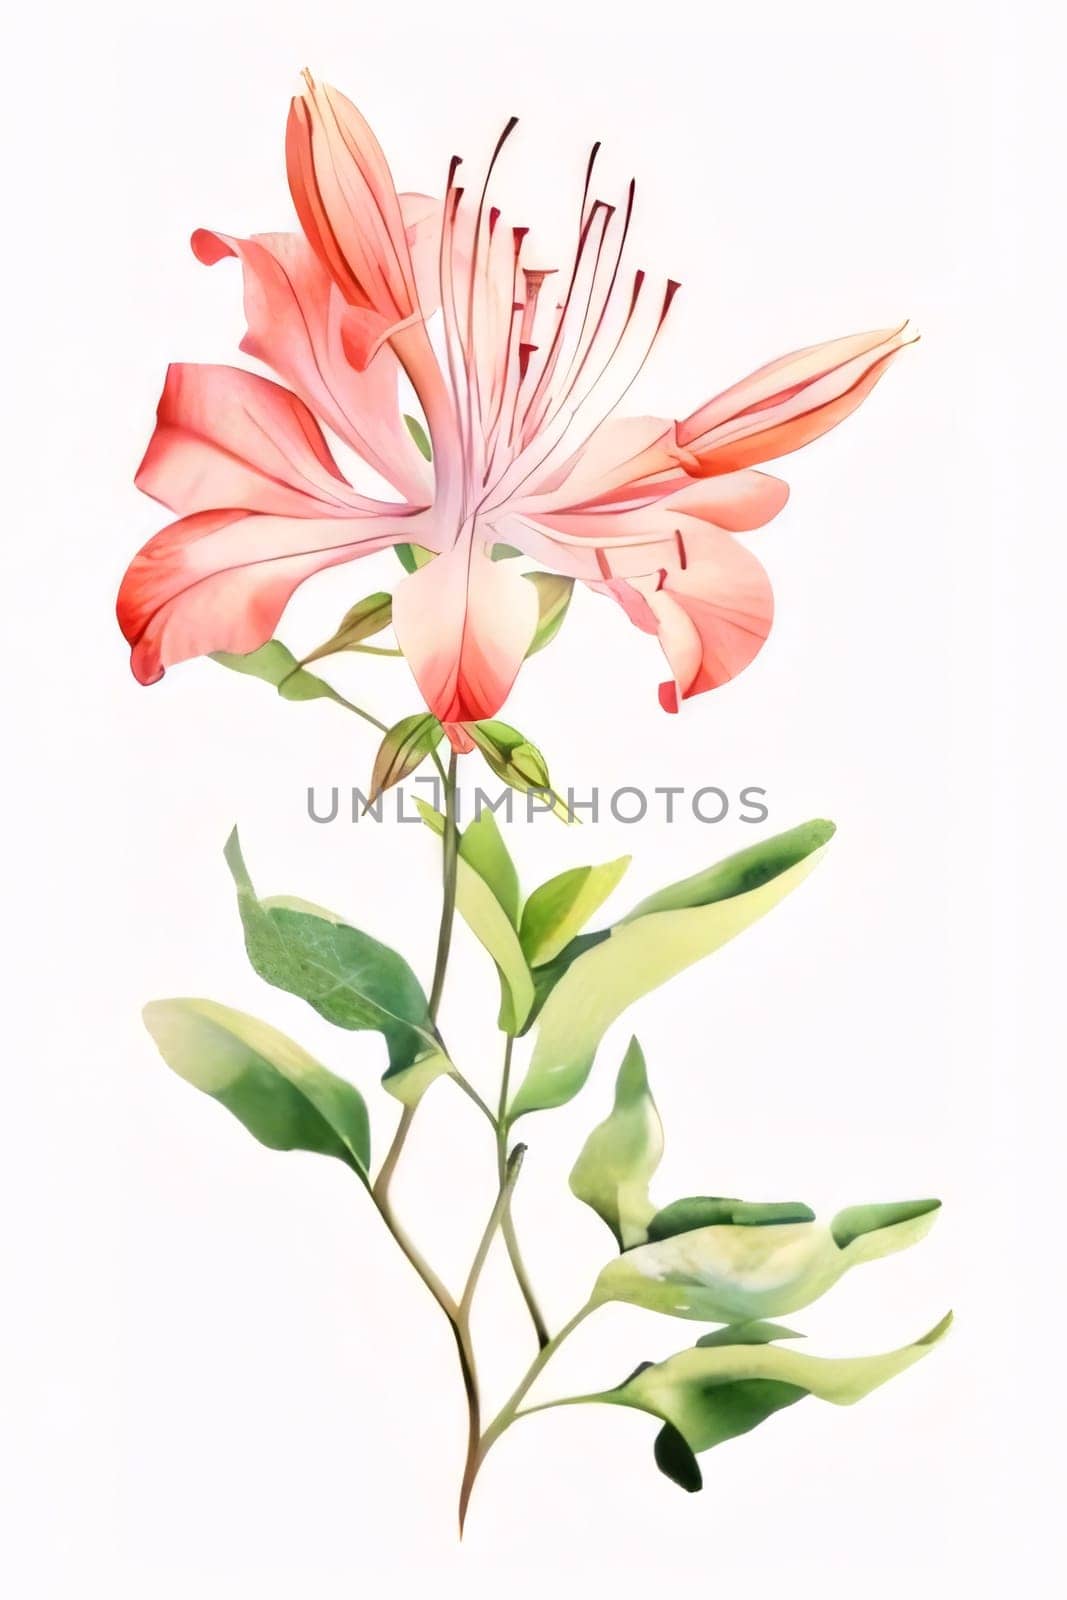 Drawn, painted red flower on isolated white background. Flowering flowers, a symbol of spring, new life. by ThemesS